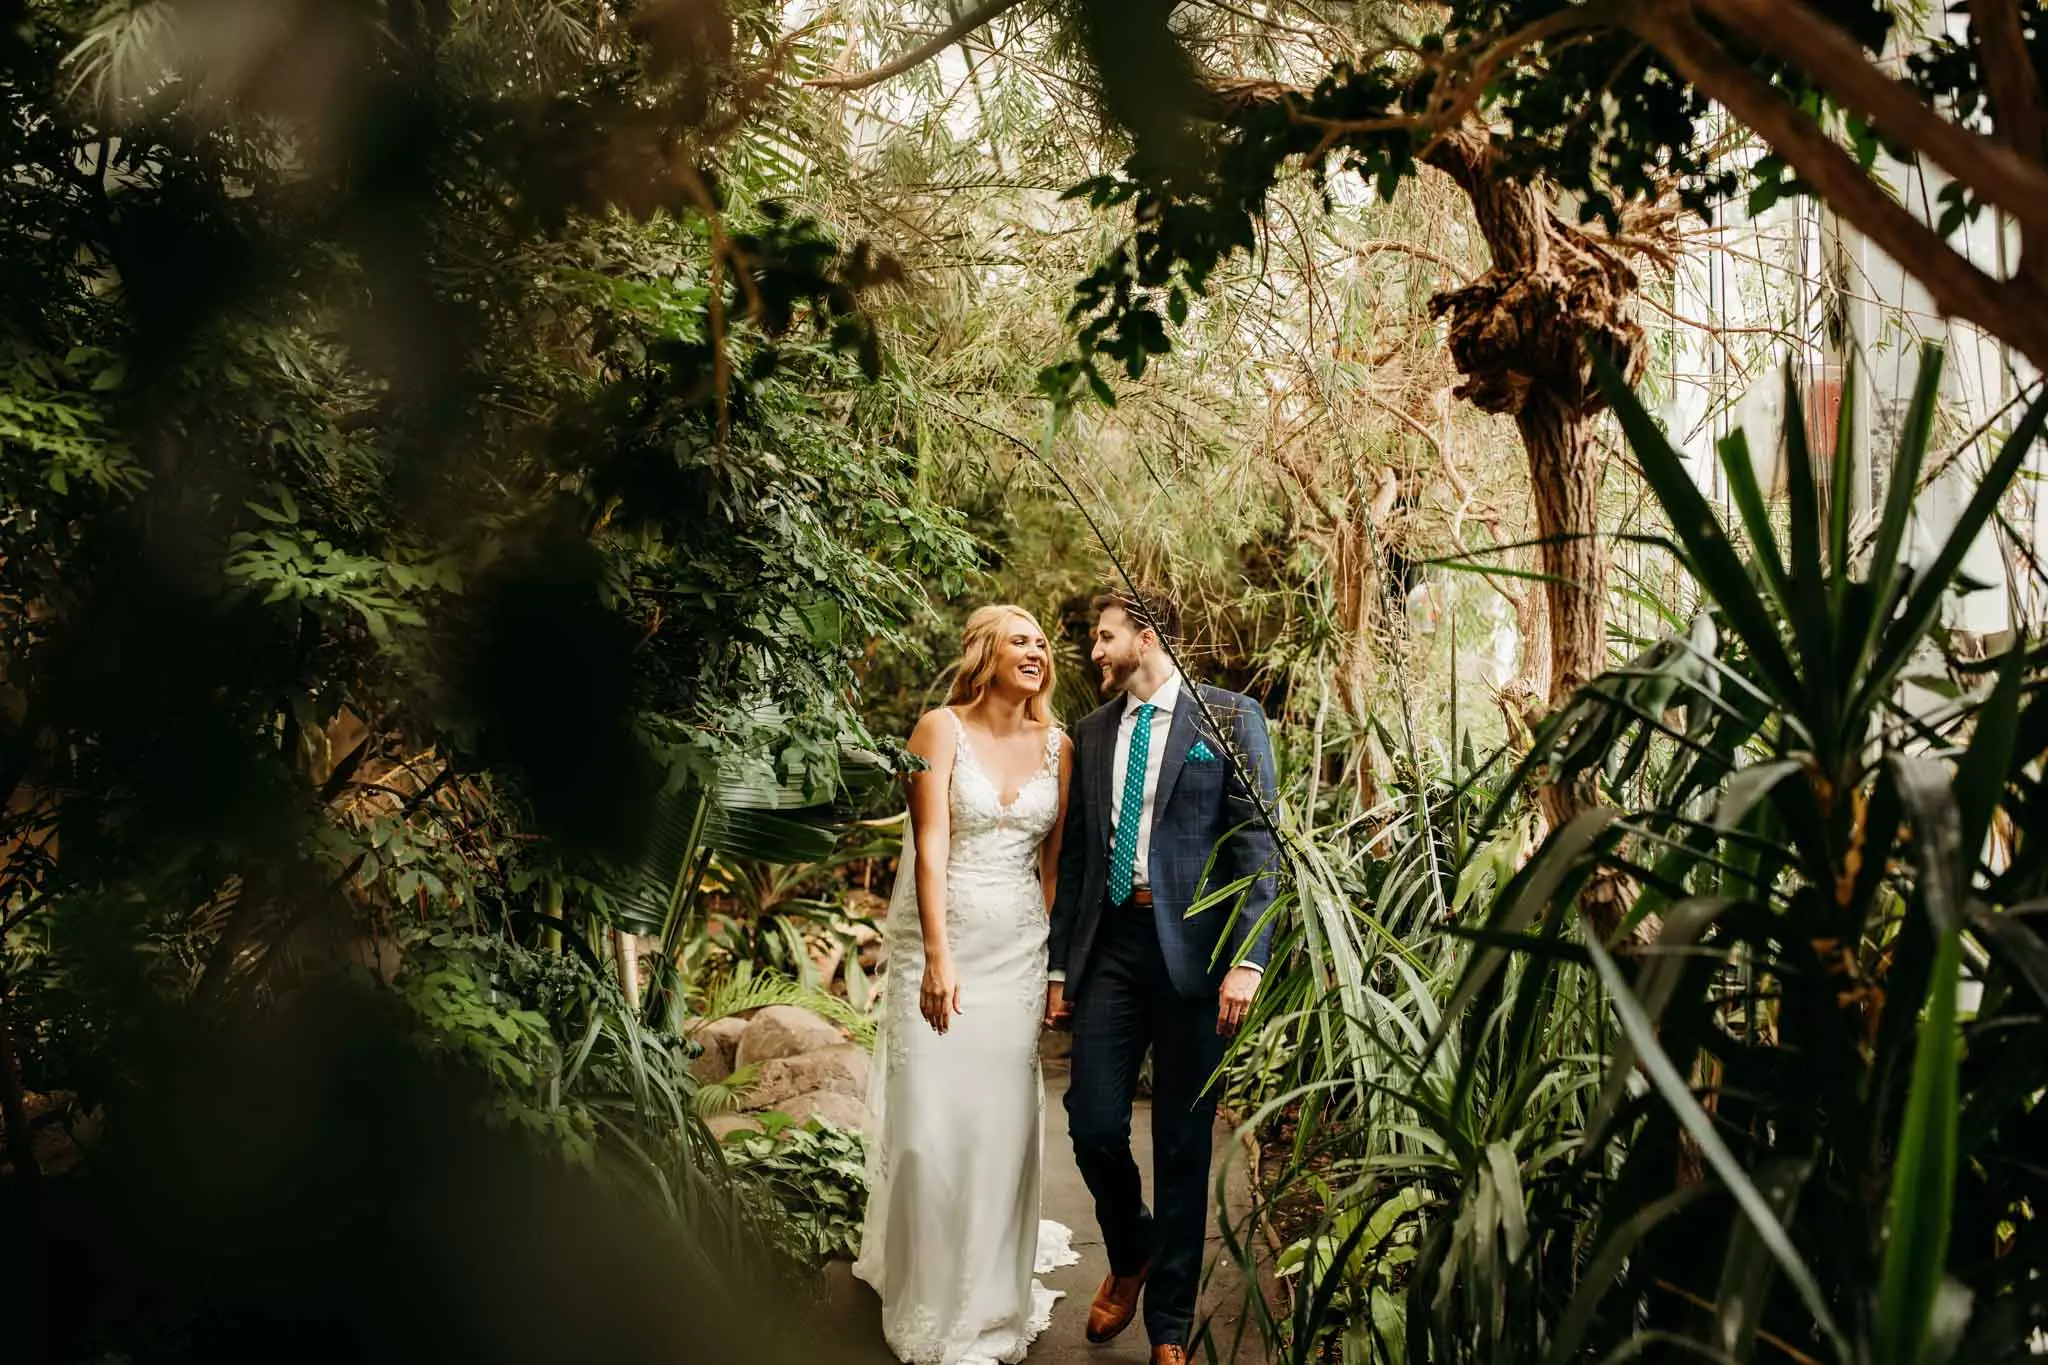 Newly married couple walking in the Discovery Center with plants surrounding them